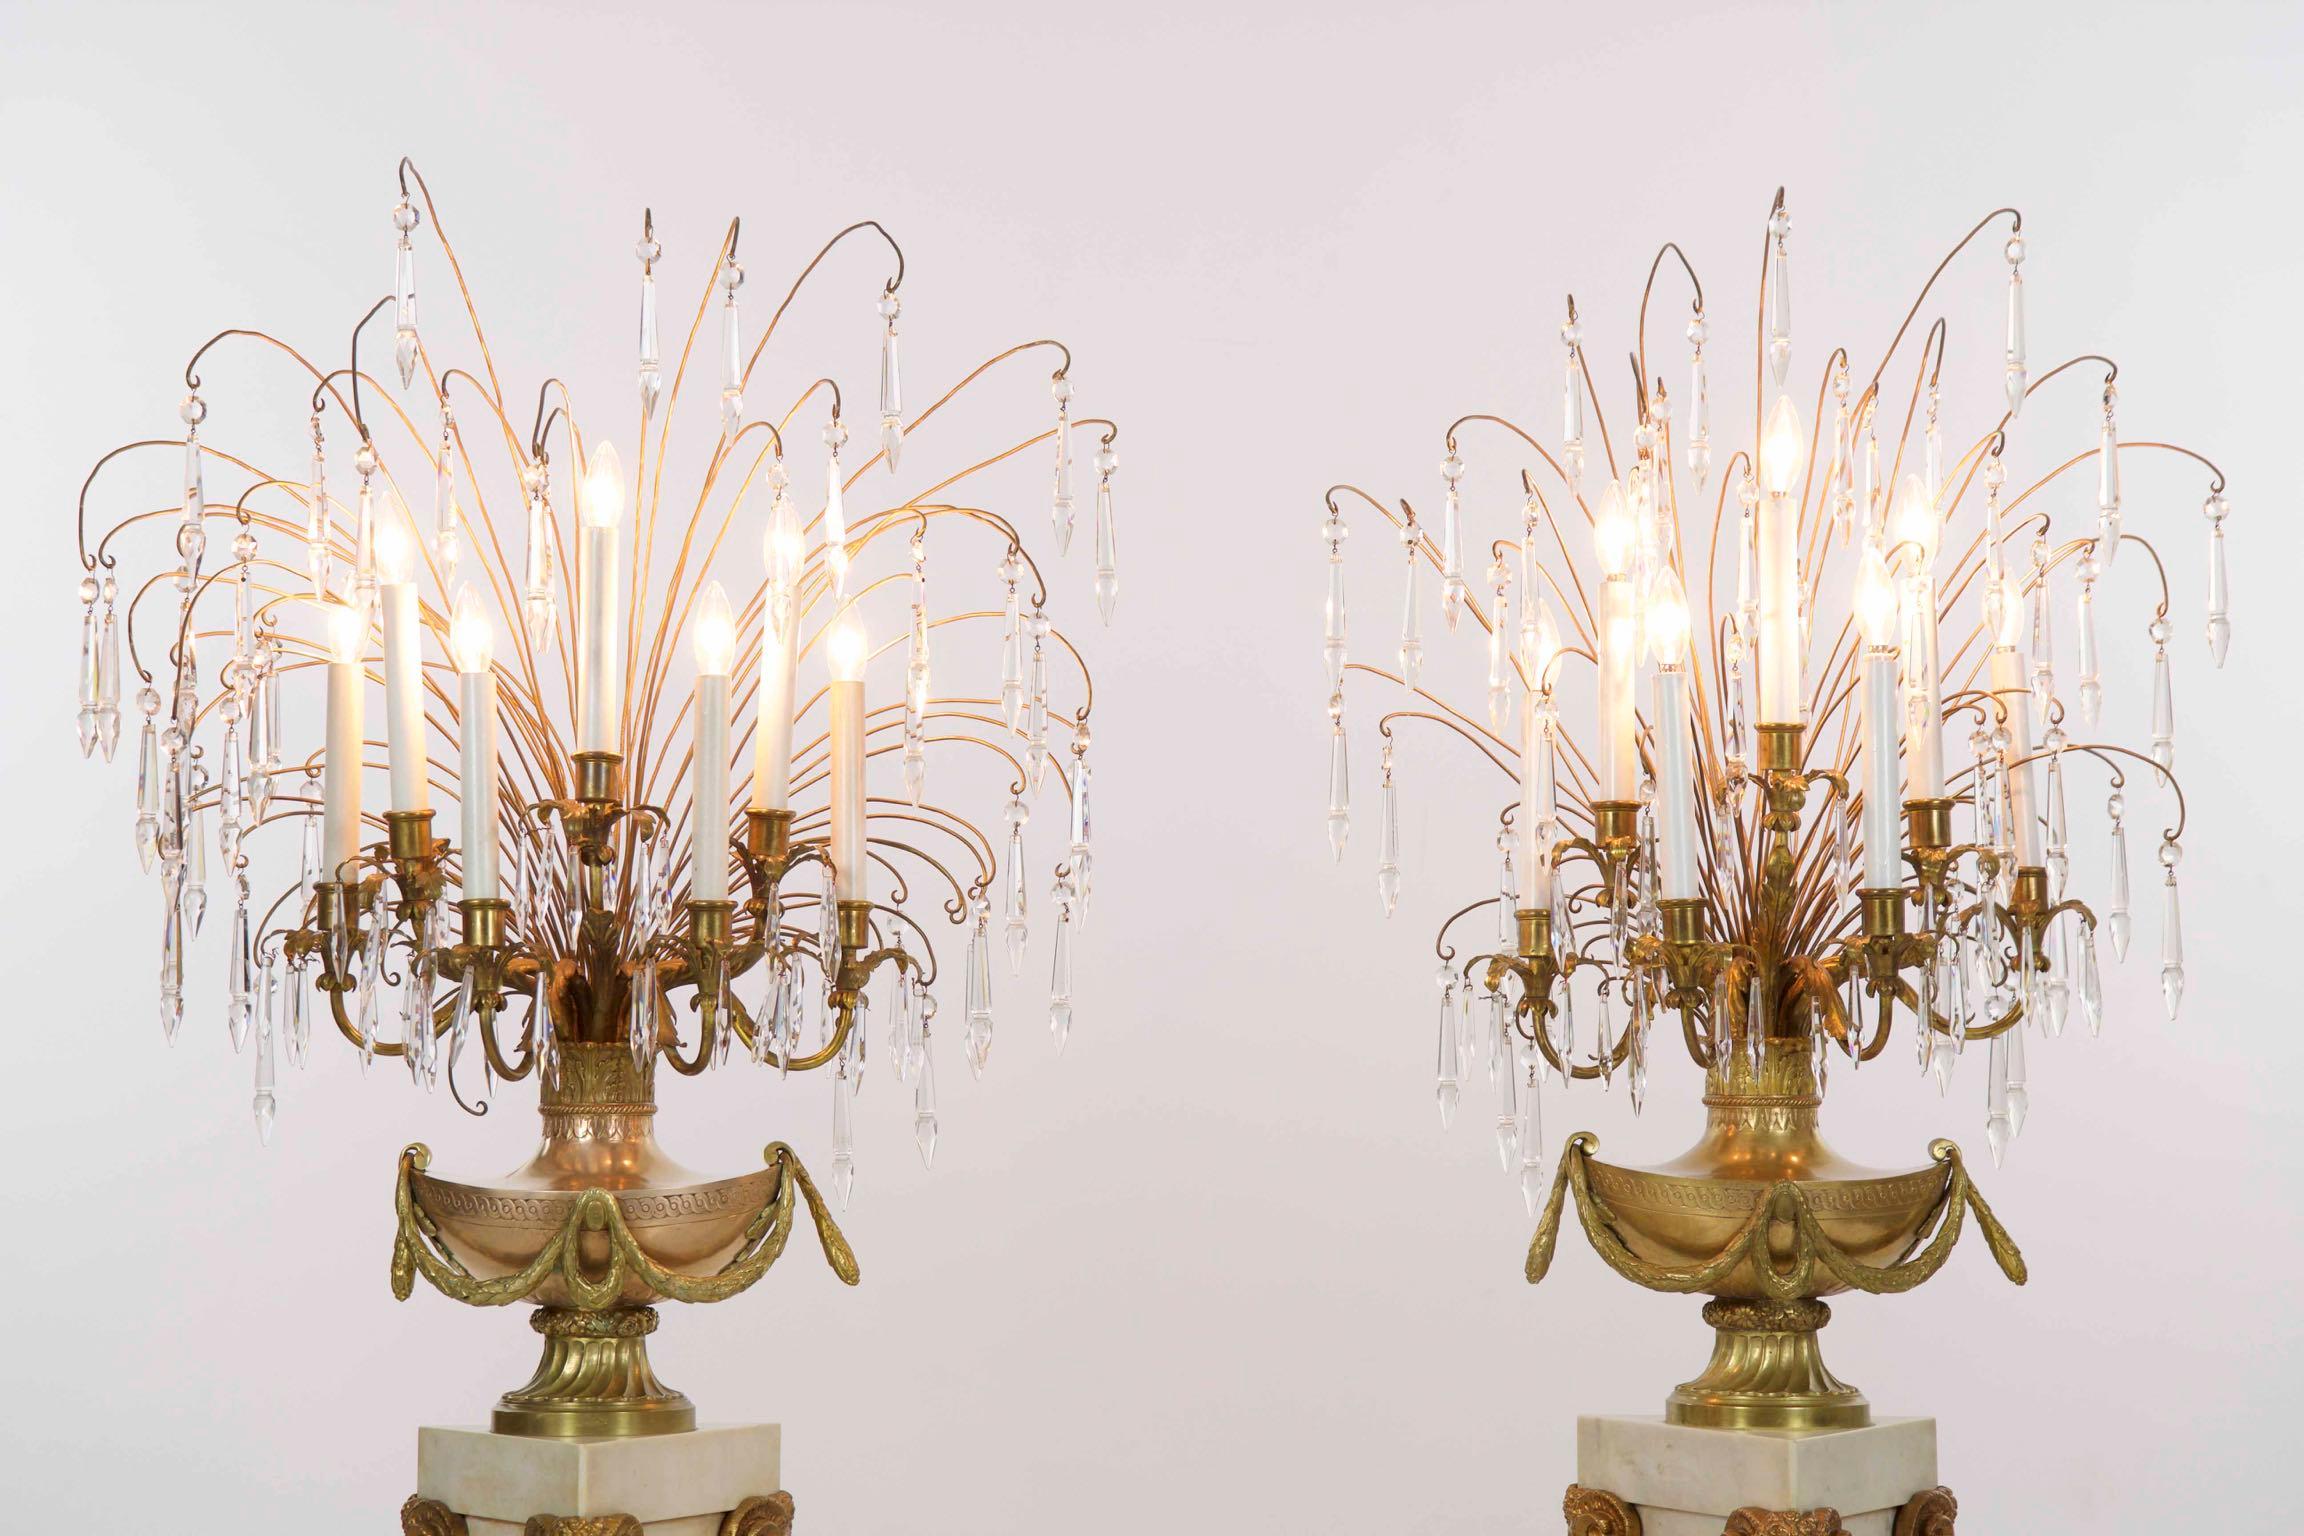 Pair of neoclassical white marble and gilt bronze candelabra likely, French, circa early 20th century

This unusually excellent pair of seven-light candelabra are a powerful strike point for the interior, each with a series of crystals hanging